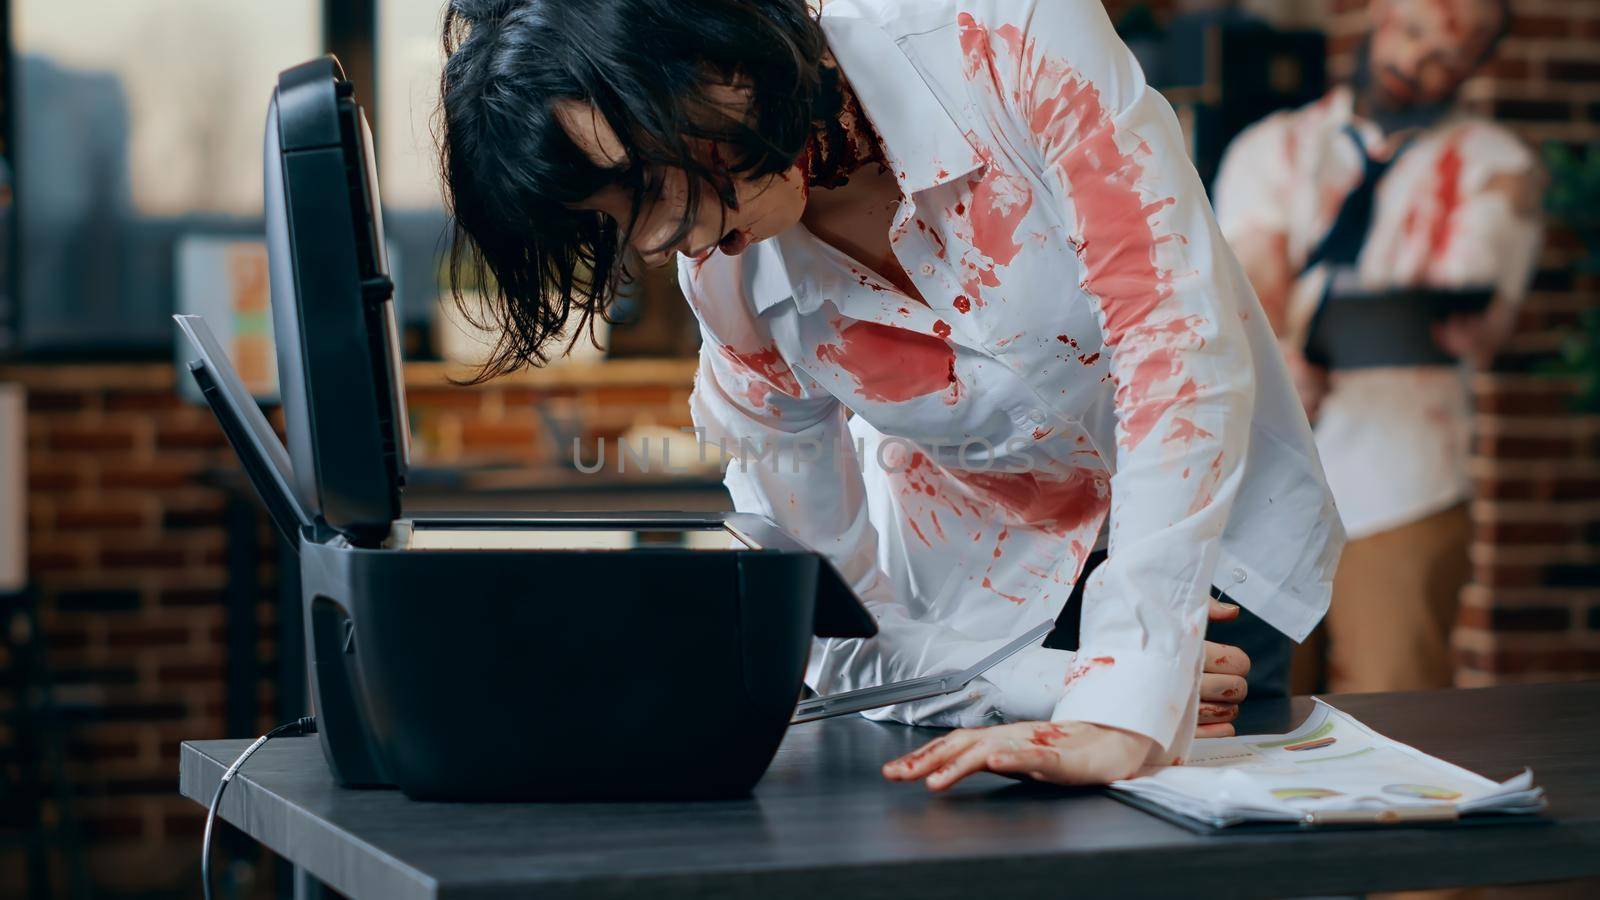 Dumb creepy looking zombie trying to use photocopy machine. Spooky evil brainless monster with deep and bloody scars and wounds while damaging scanner machine in company office workspace.